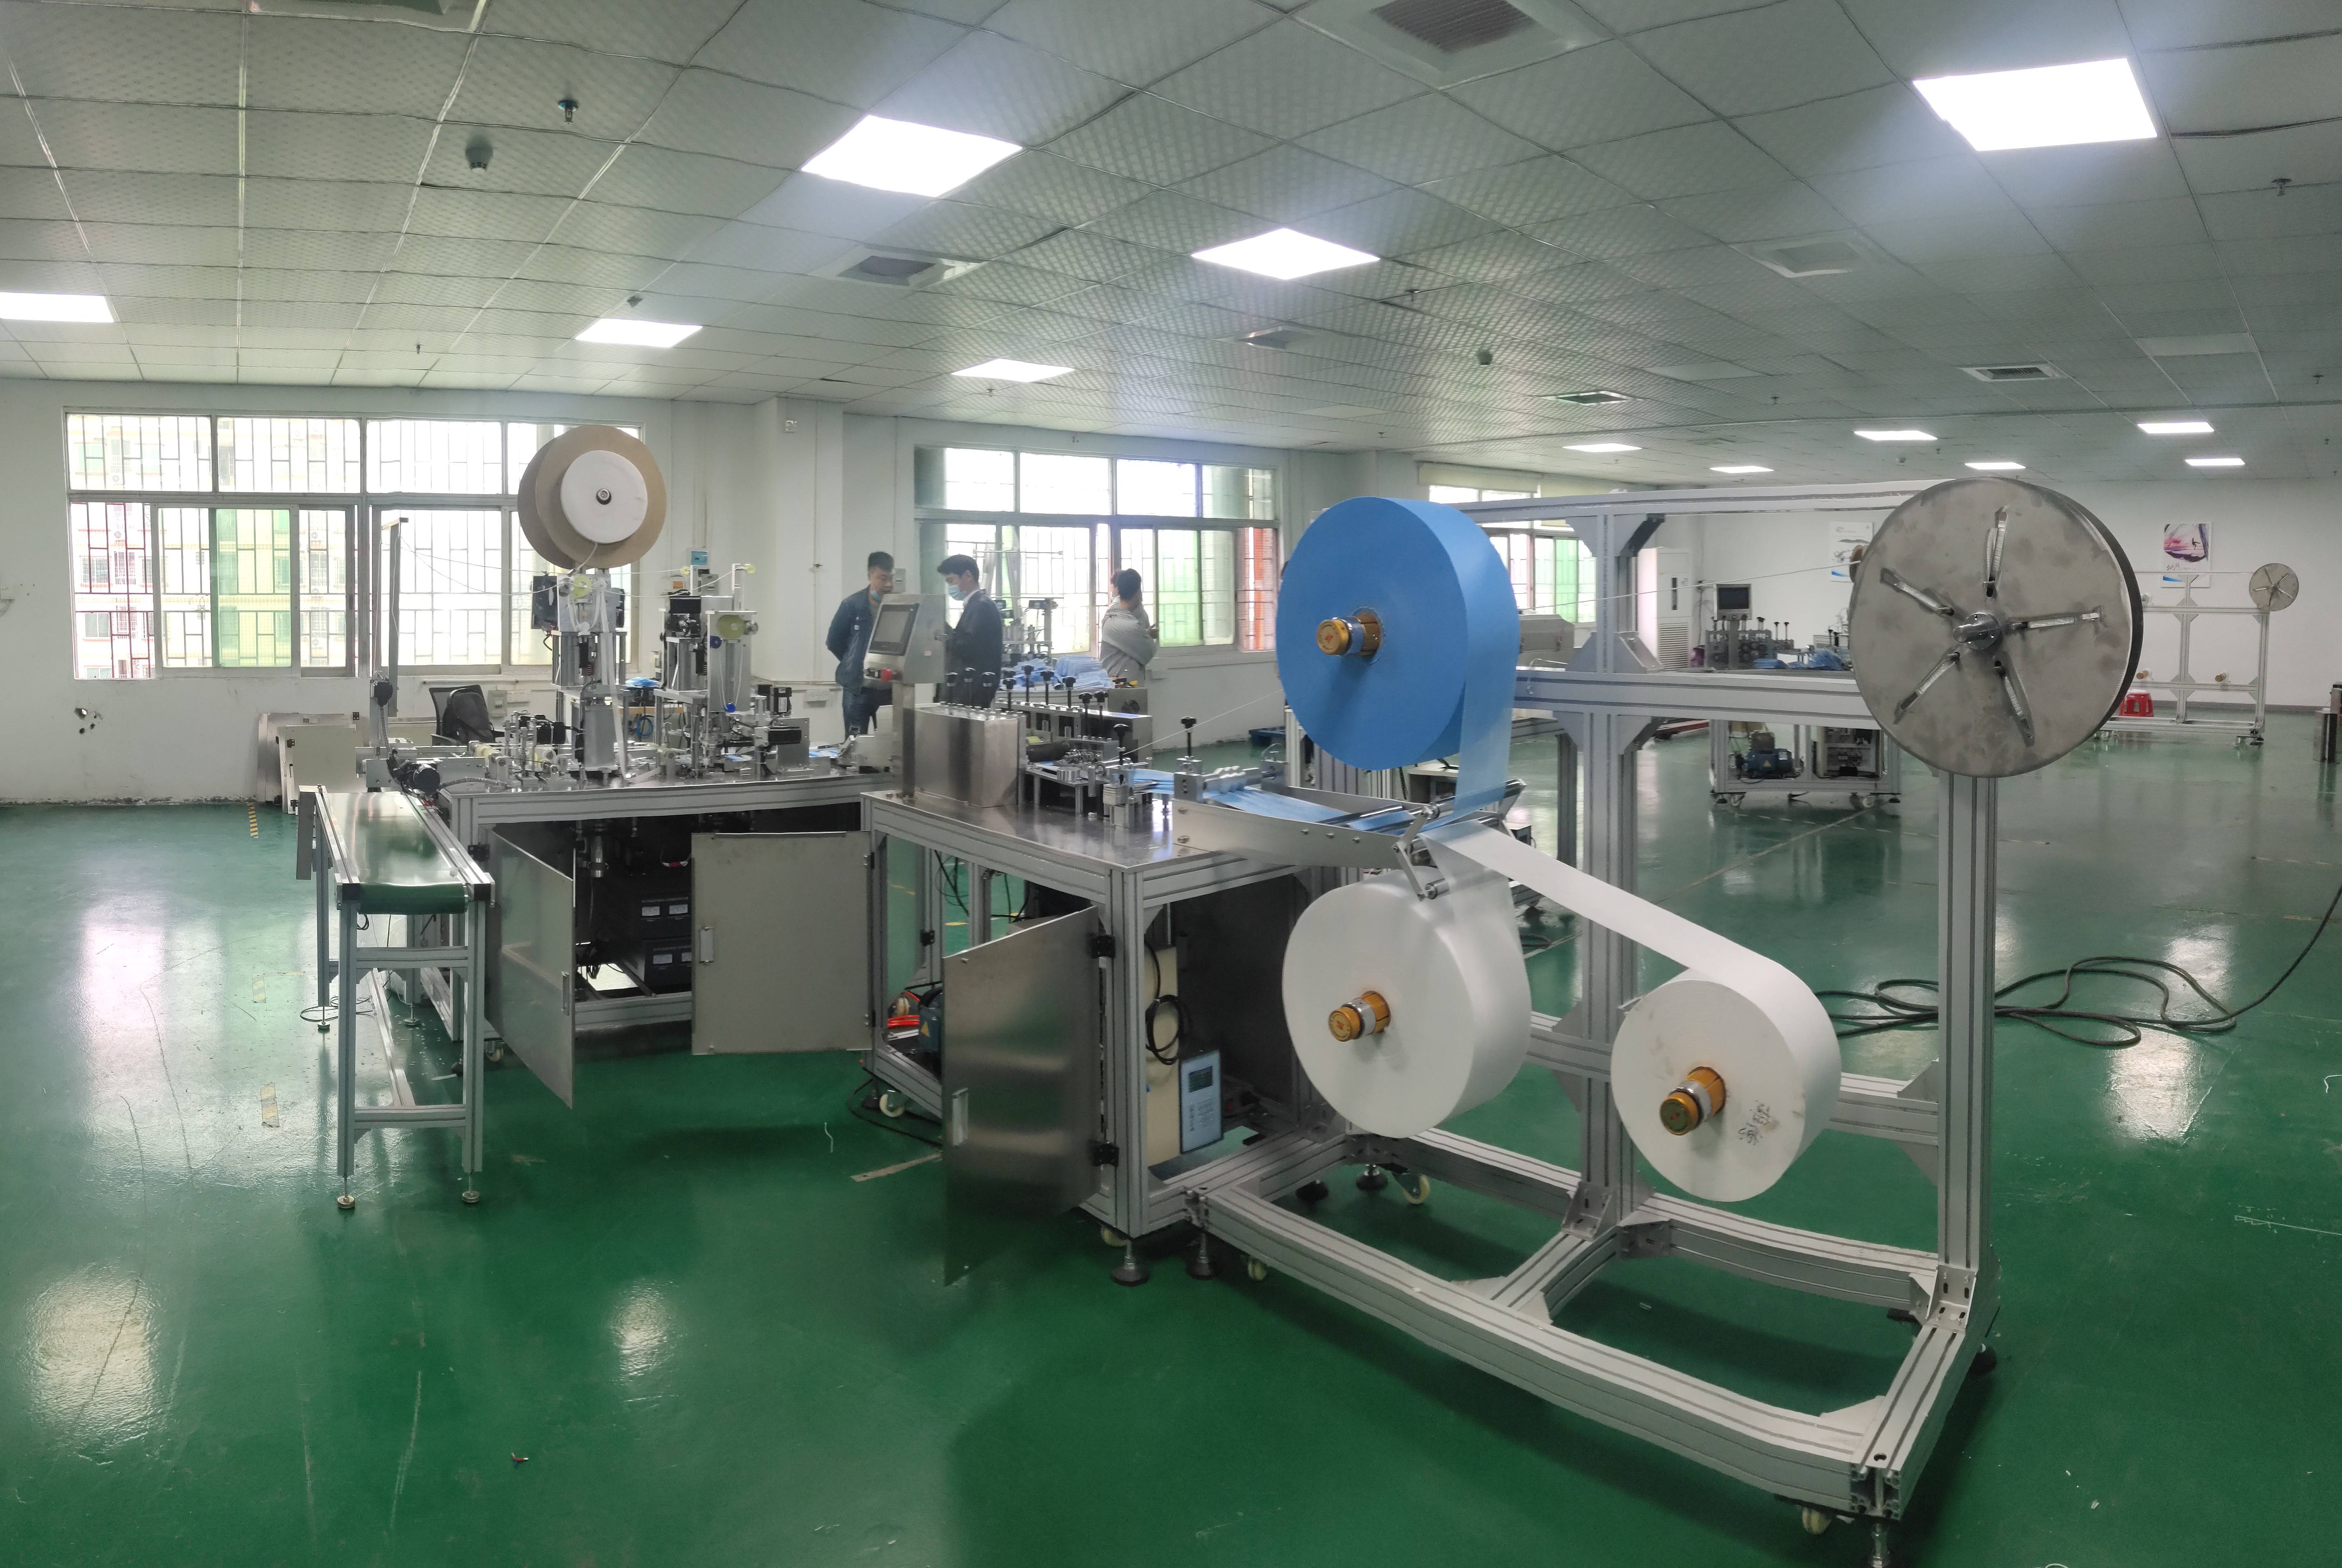 Automatic 3 layers disposable plane face mask making machine Featured Image